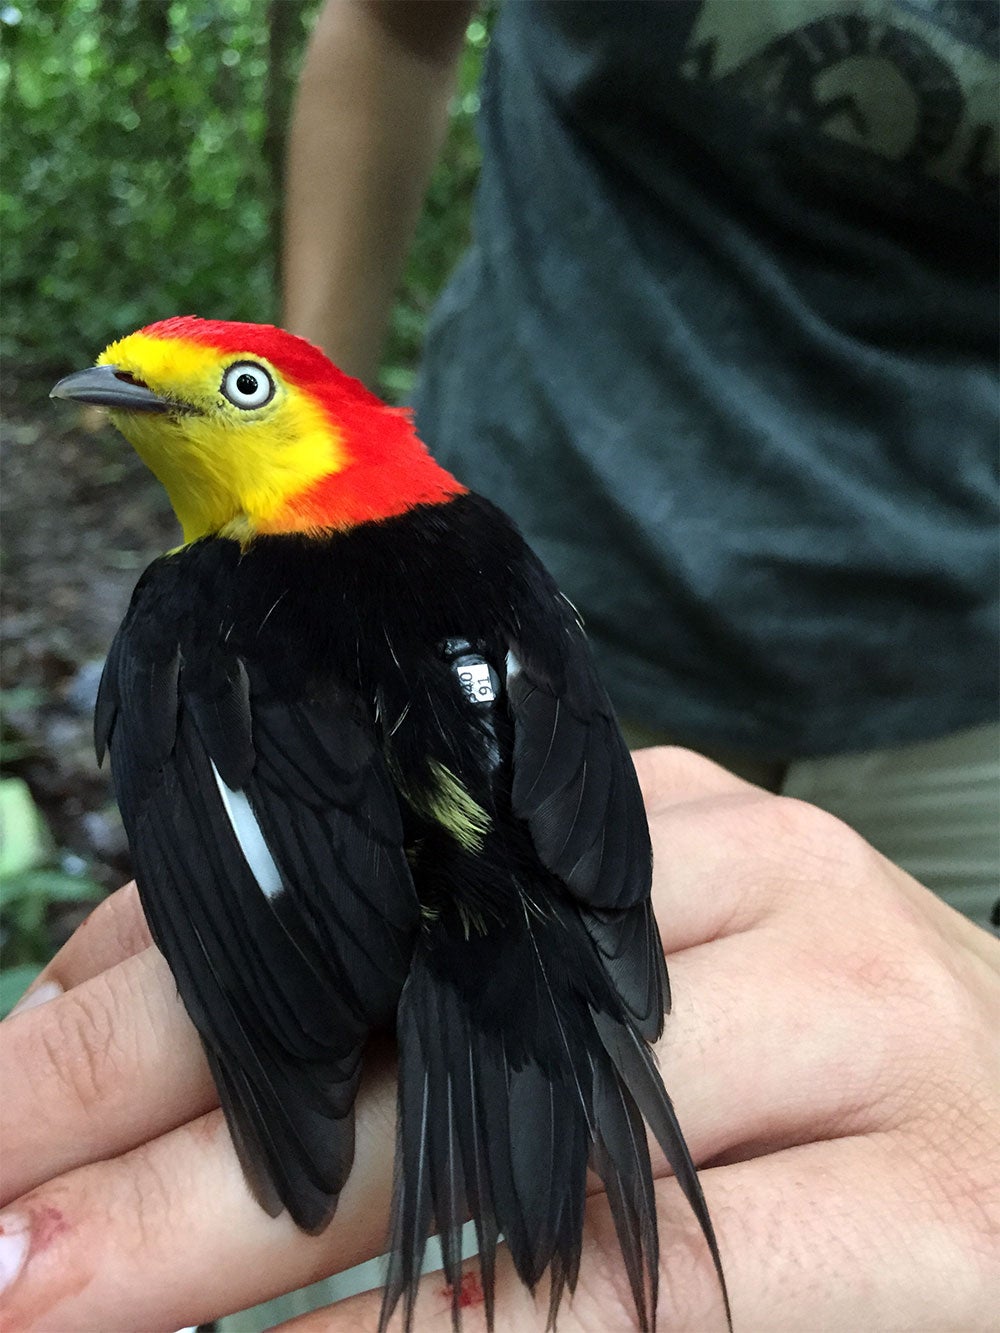 An adult wire-tailed manakin bird fitted with a coded nano tag for tracking its movement